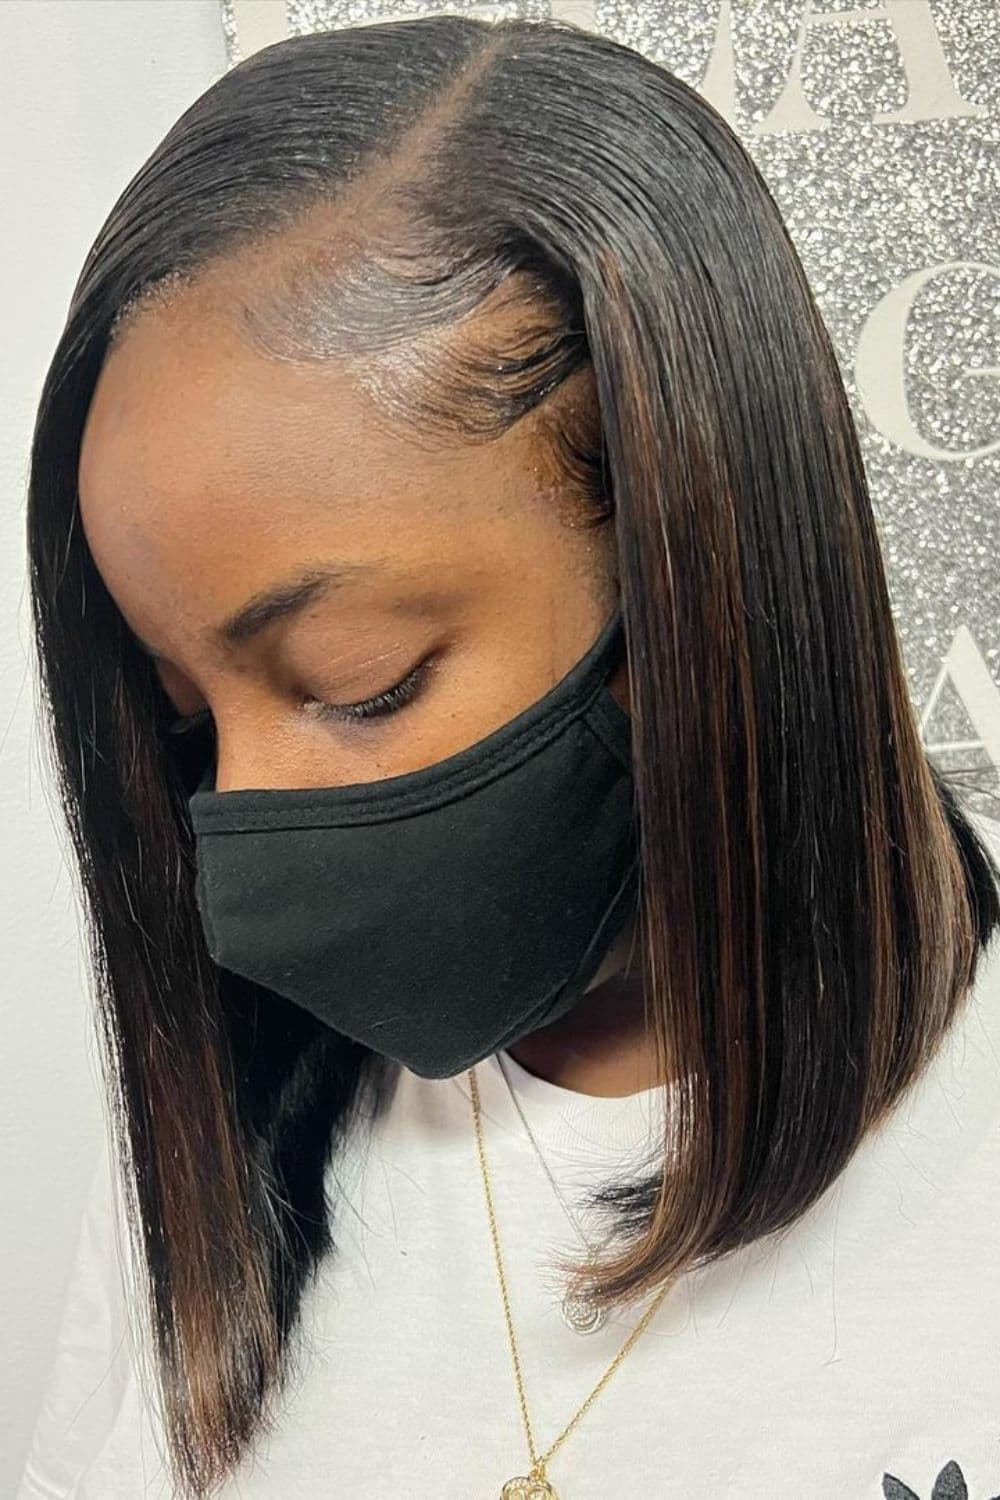 A black woman wearing a black mask with a side-parted angled bob cut.